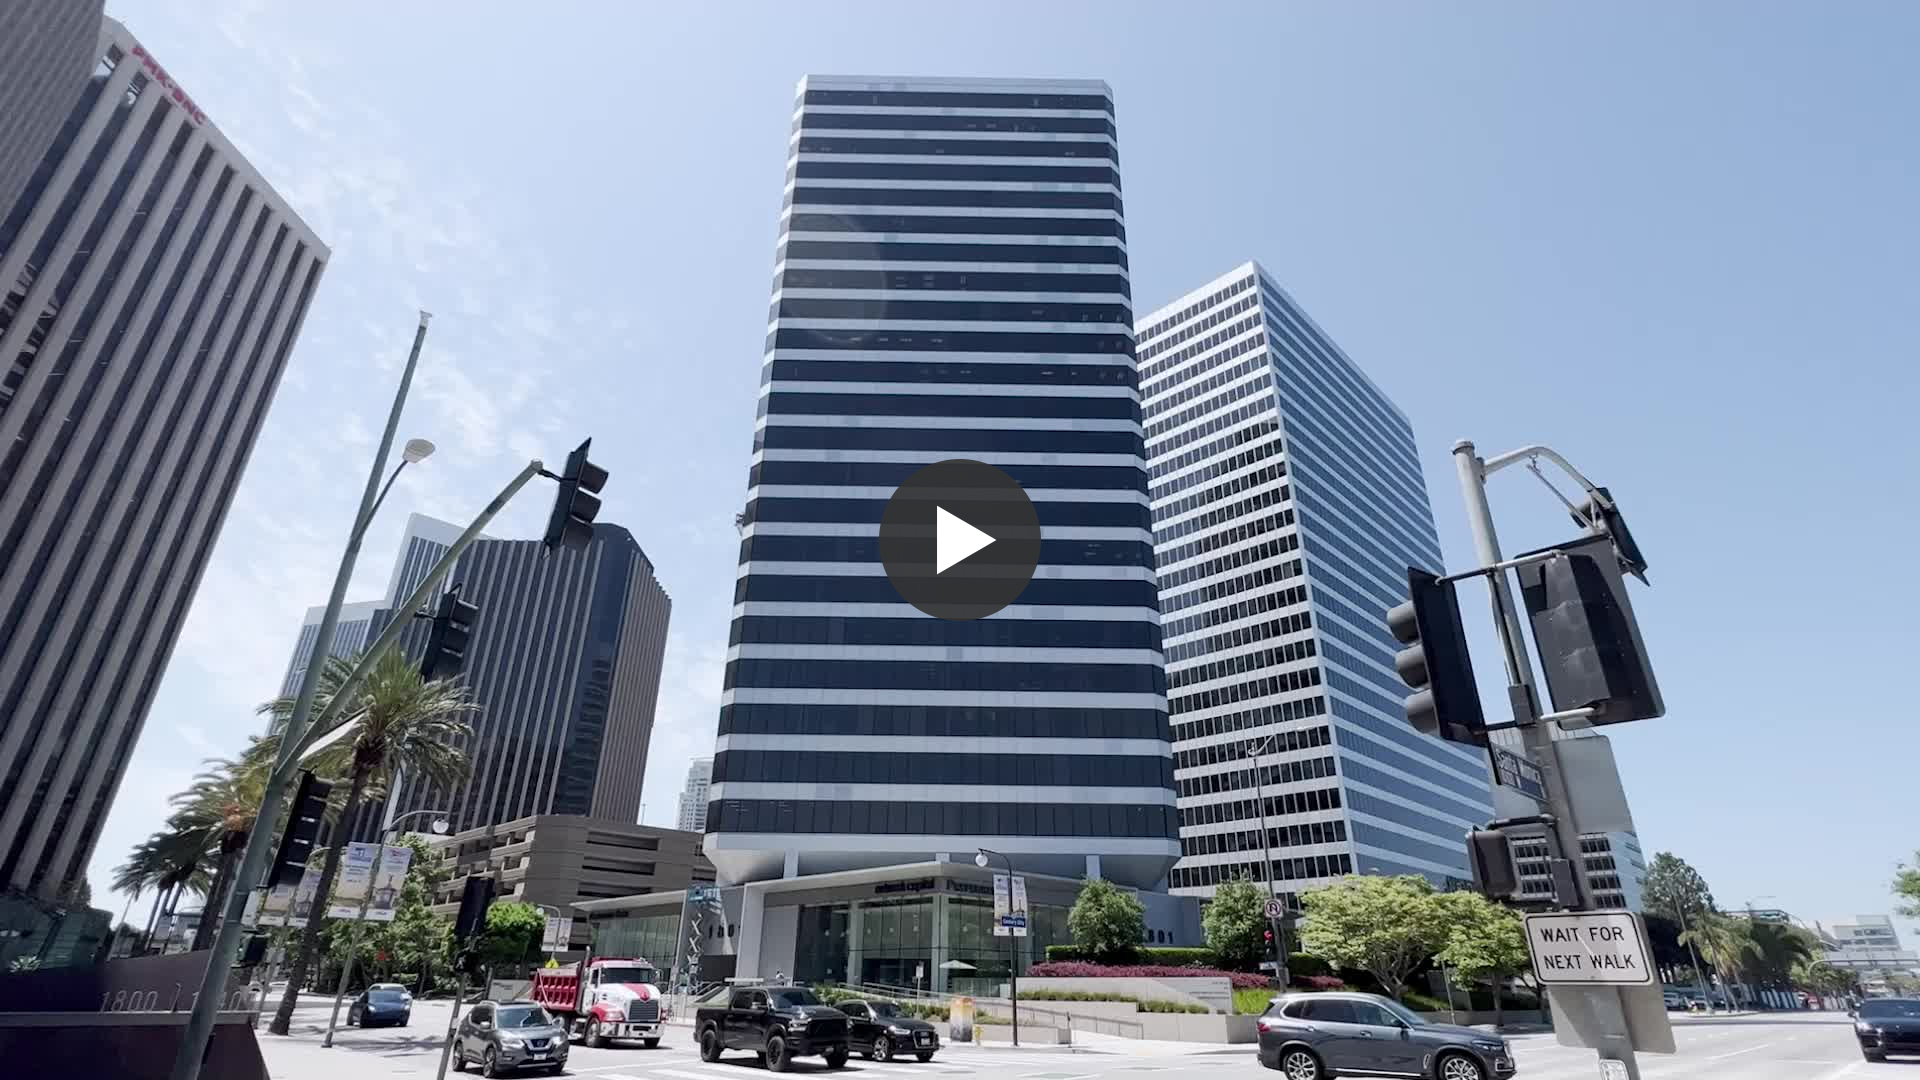 1801 Century Park East, Los Angeles, CA Office Space for Rent | VTS